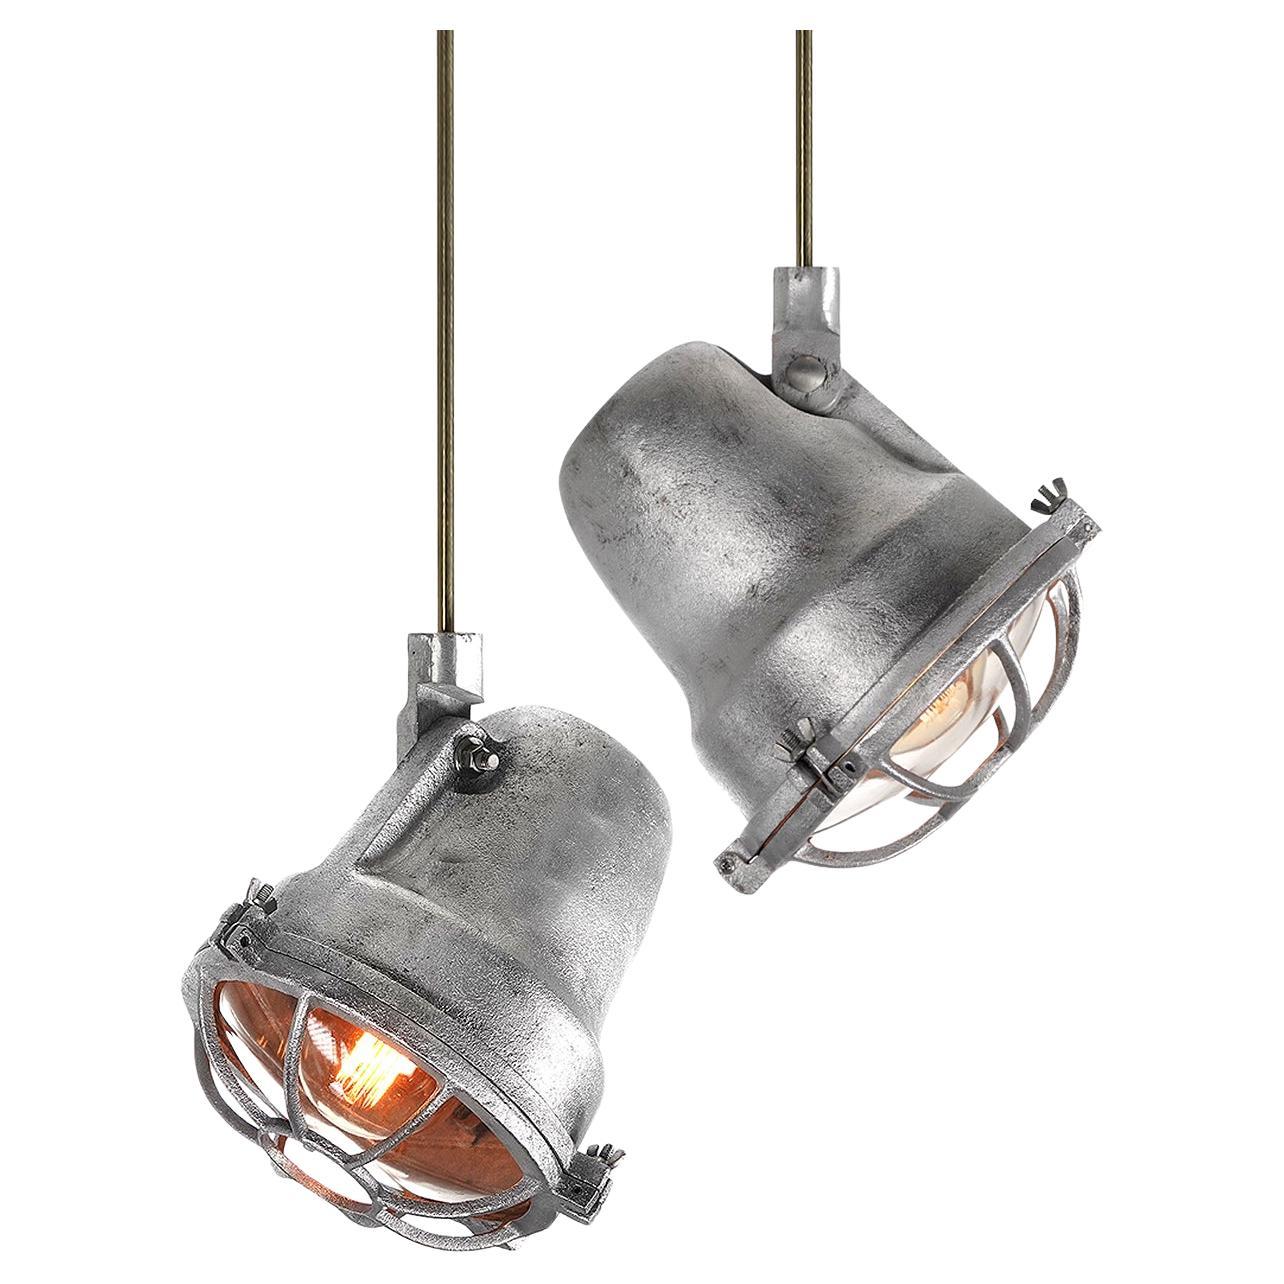 Caged Cast Aluminum Articulated Industrial Spot Lights - Pair For Sale